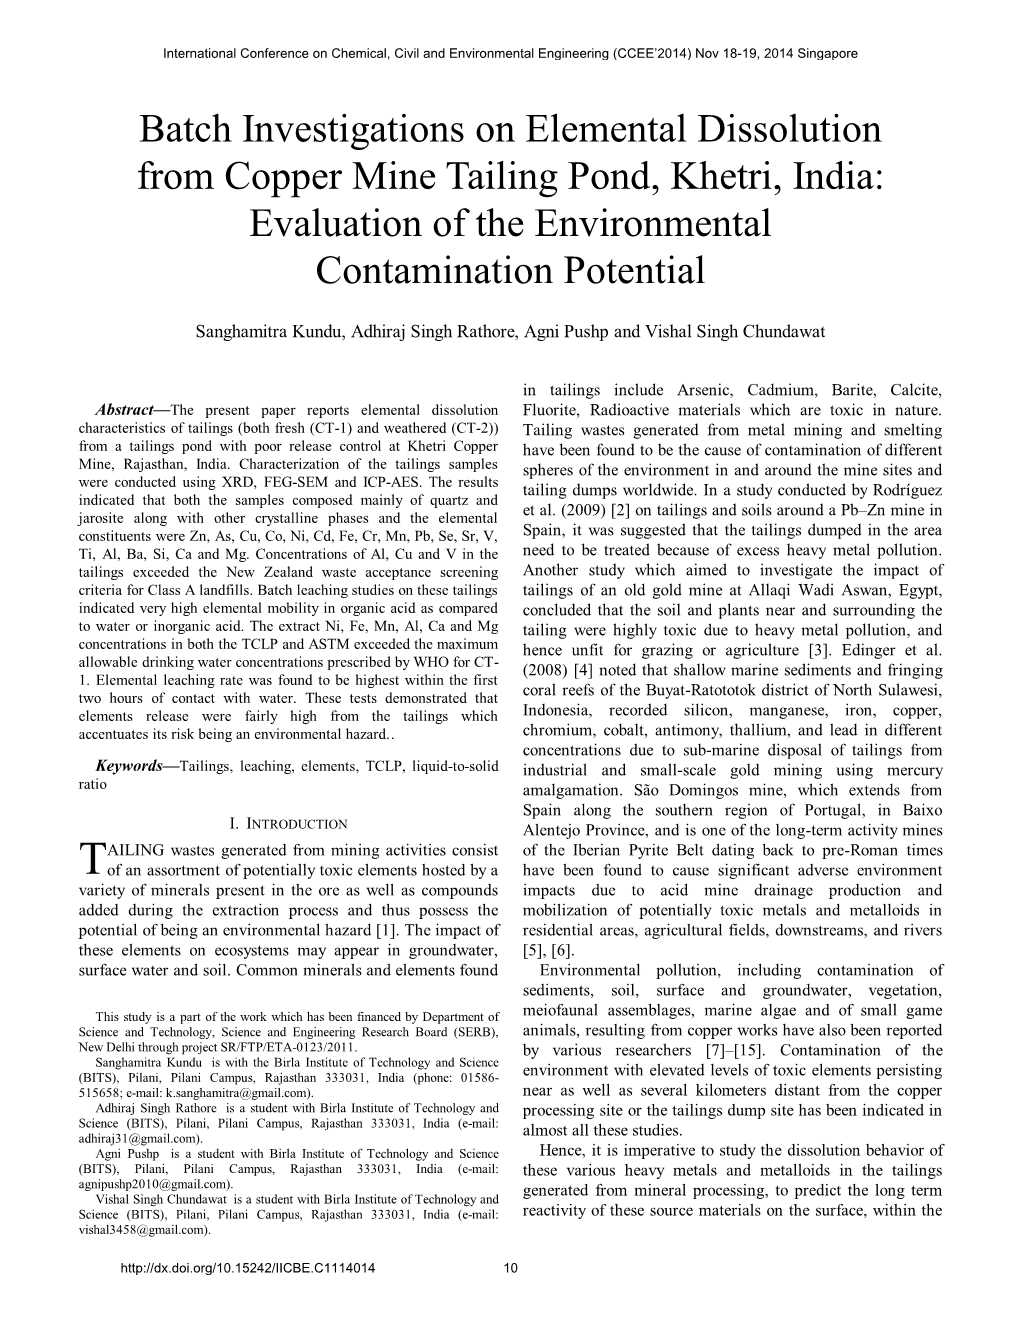 Batch Investigations on Elemental Dissolution from Copper Mine Tailing Pond, Khetri, India: Evaluation of the Environmental Contamination Potential